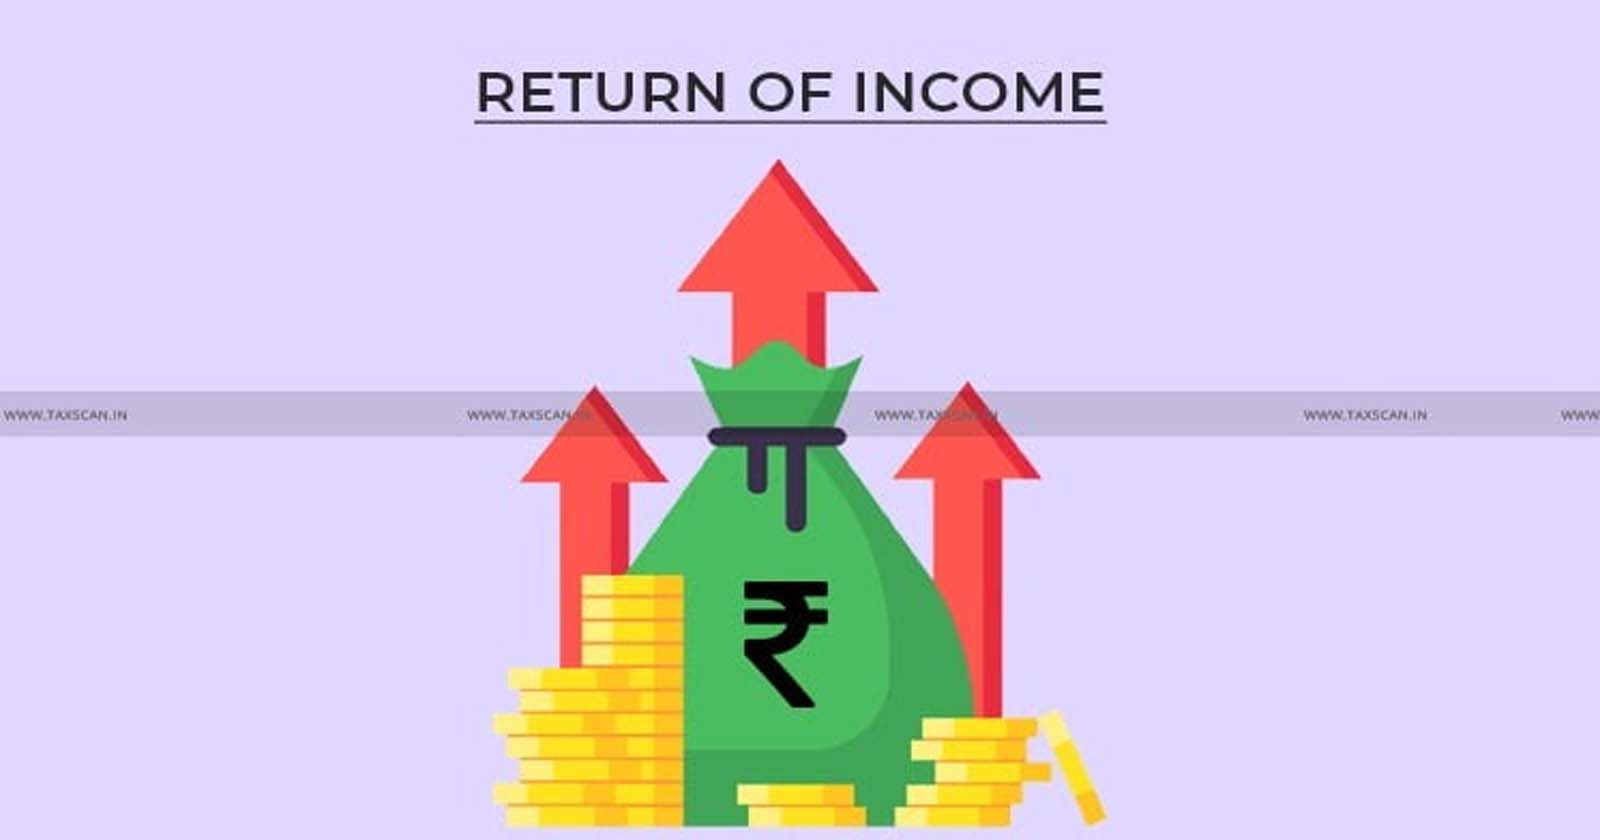 Addition made by AO - Addition - AO - Income Tax Act - Late filing of ROI - Late filing - ROI - ITAT Directs Re-adjudication - ITAT - Income Tax - taxscan